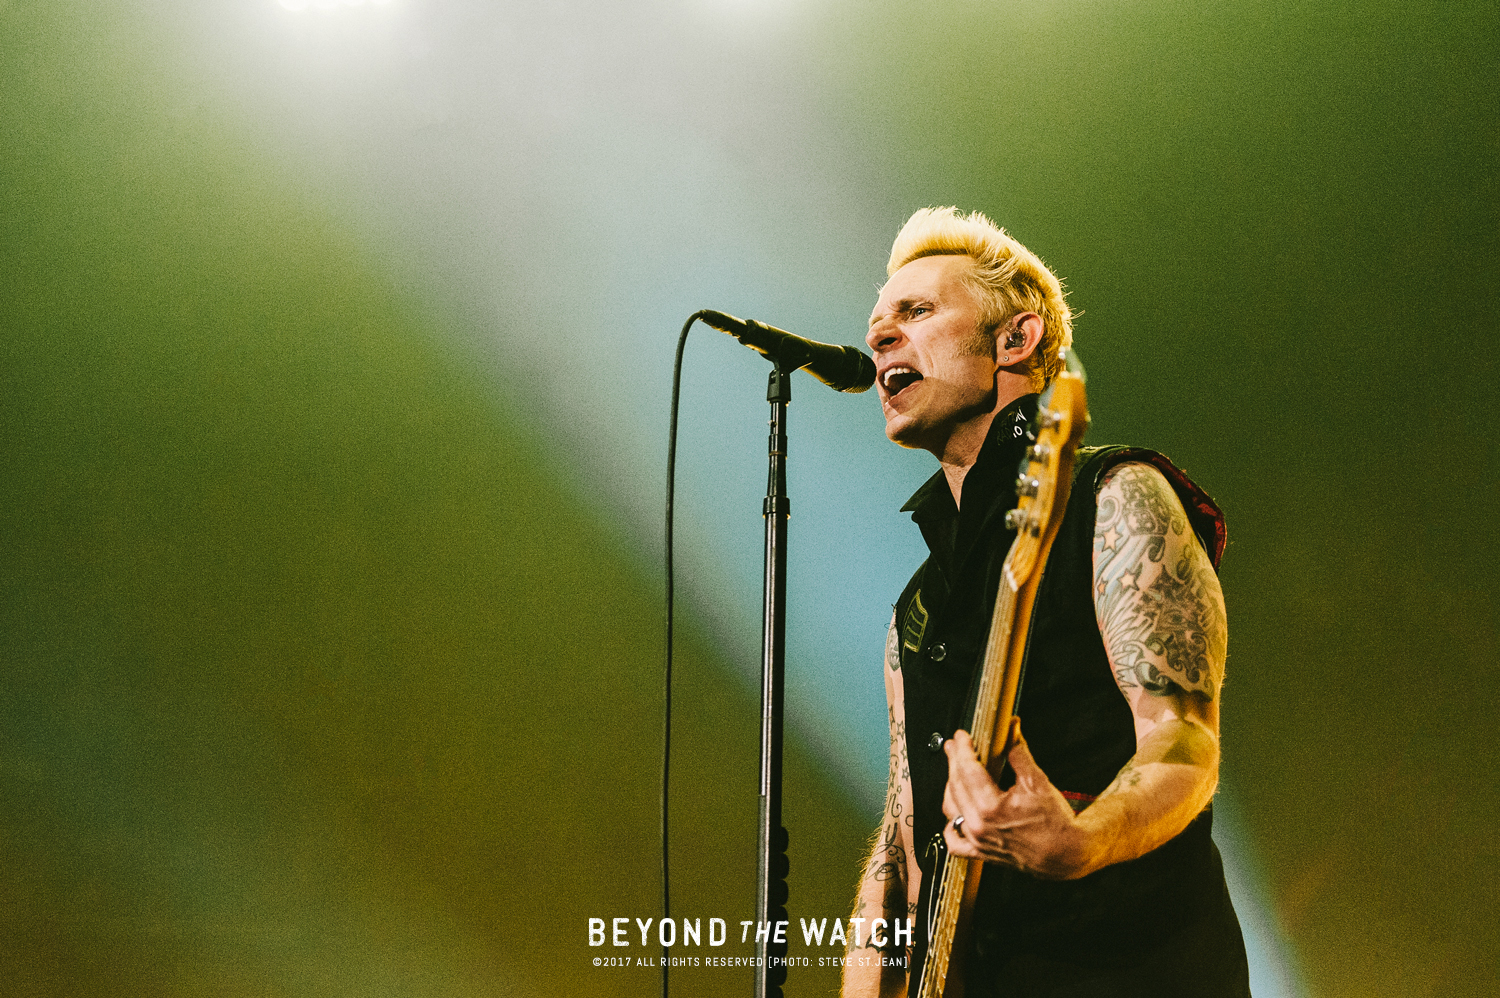  Mike Dirnt of Green Day 